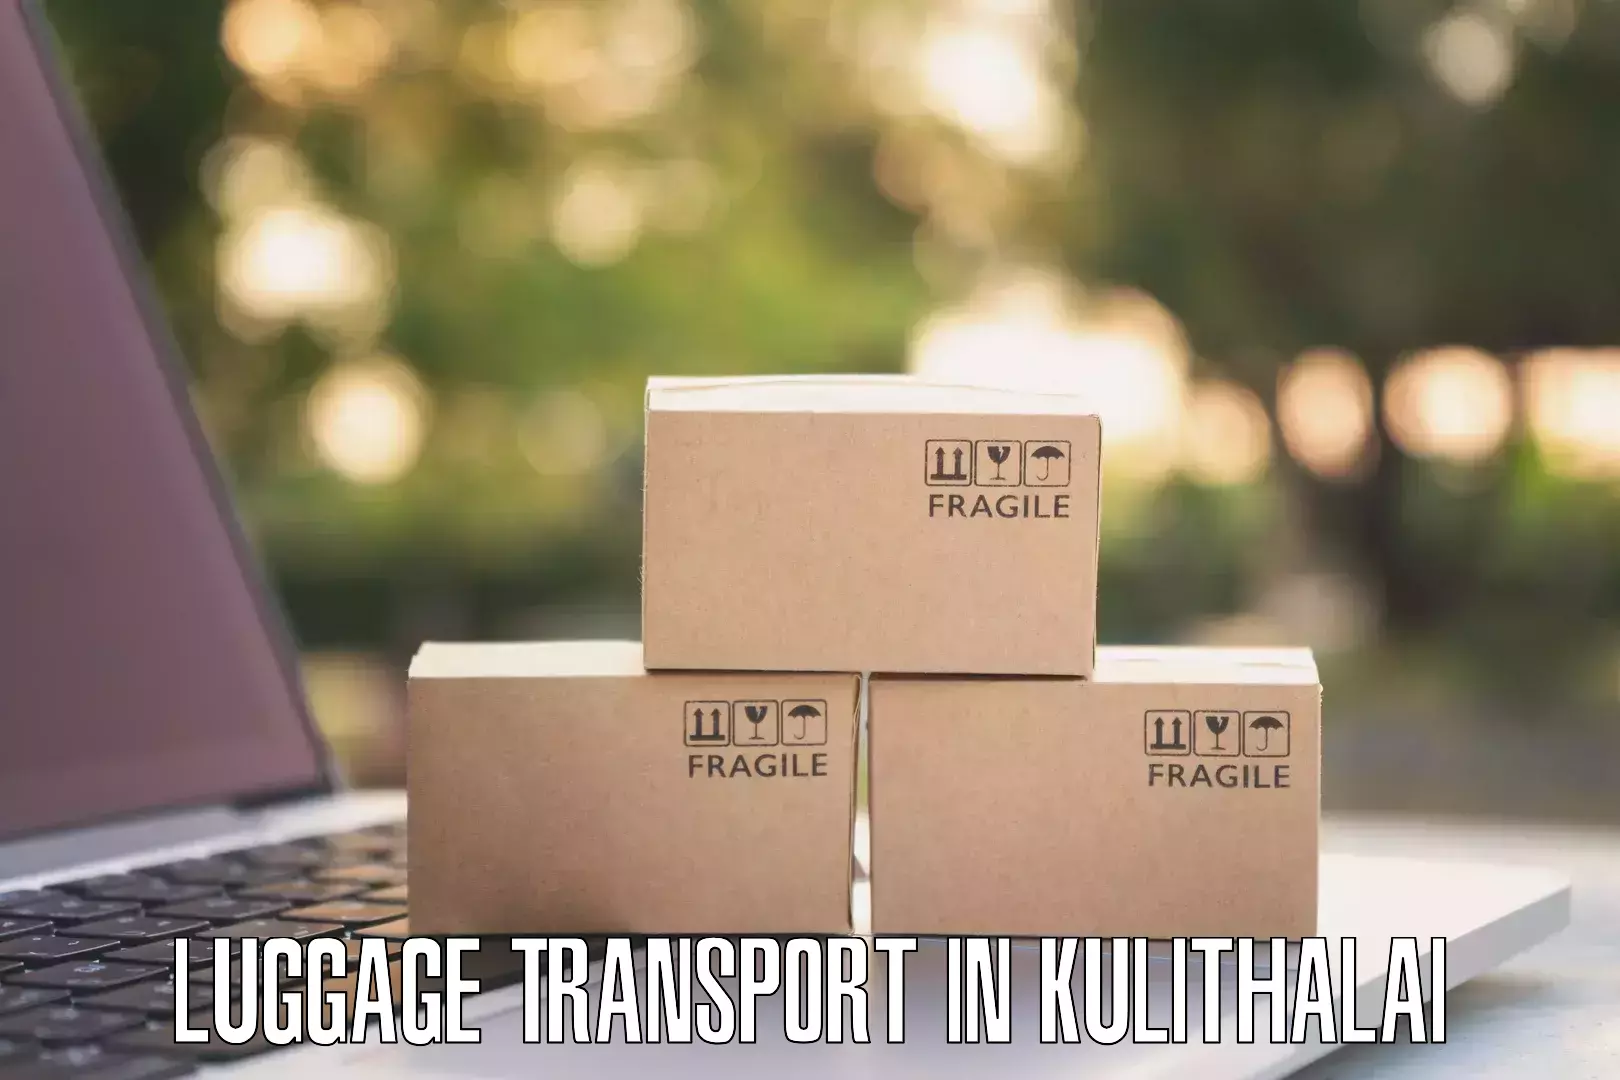 Luggage shipment specialists in Kulithalai